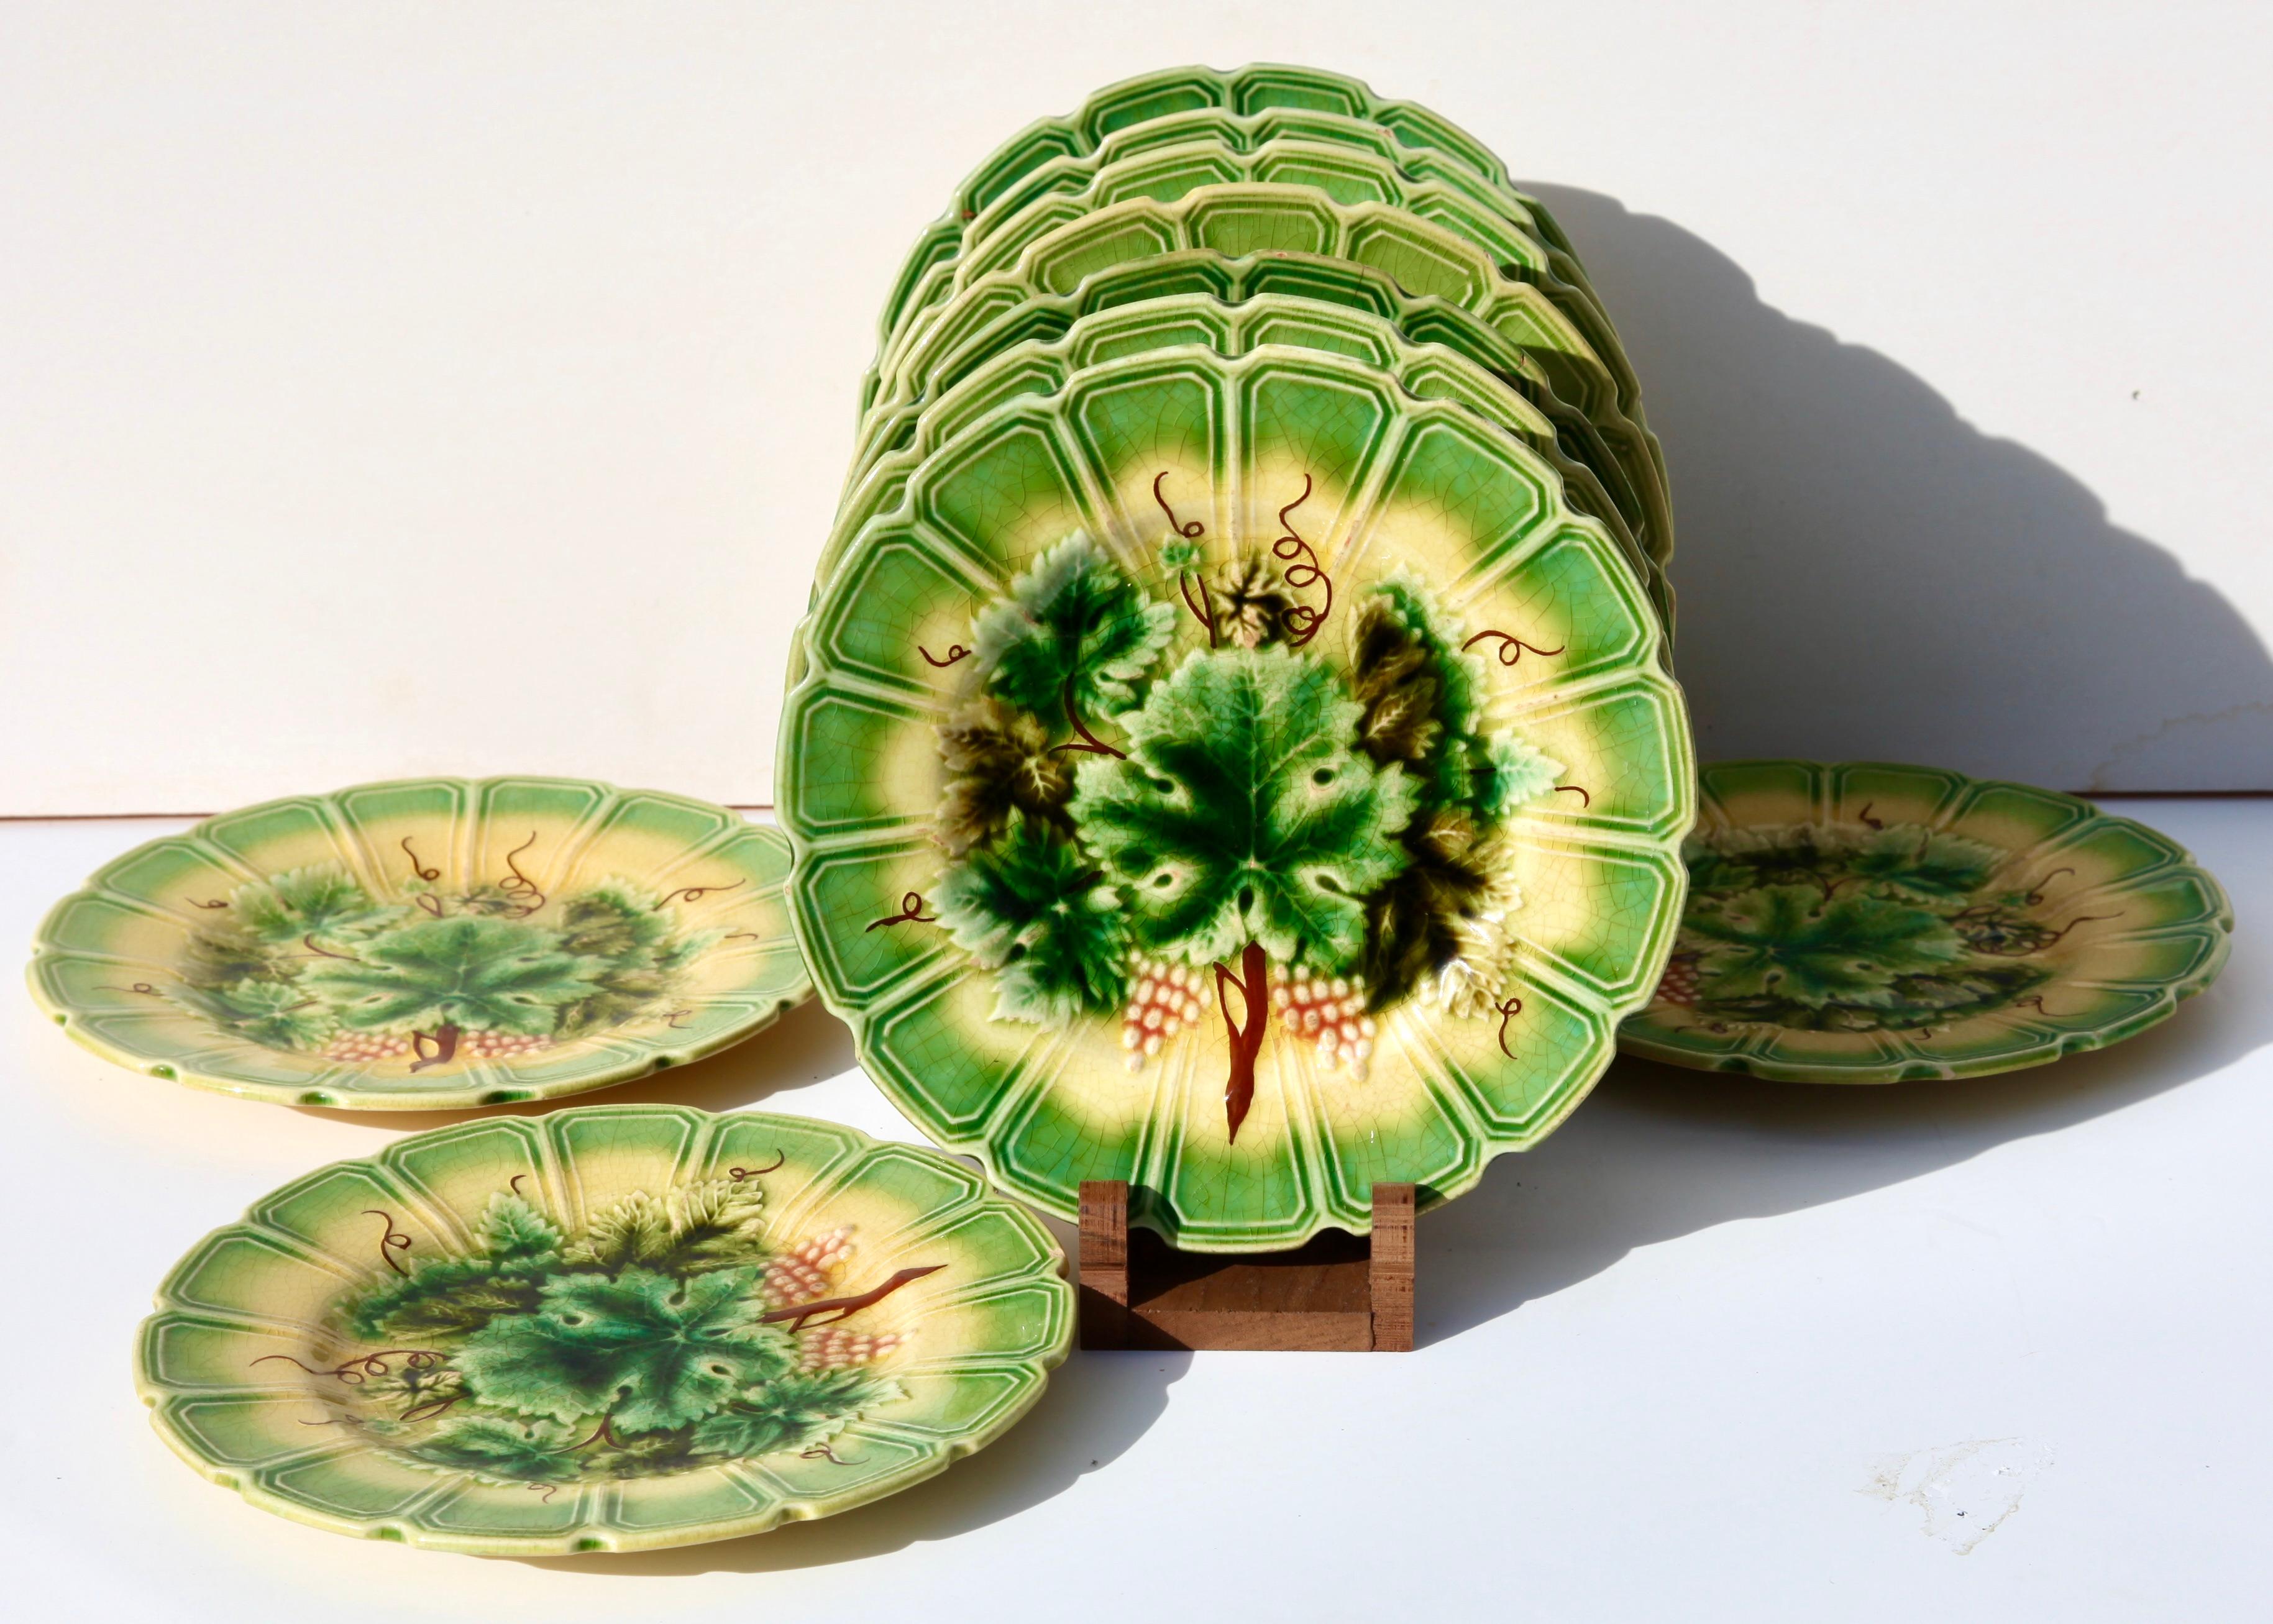 French Art Nouveau Majolica Grapes Pattern Set of 8 Plates Whit SARREGUEMINES Stamp